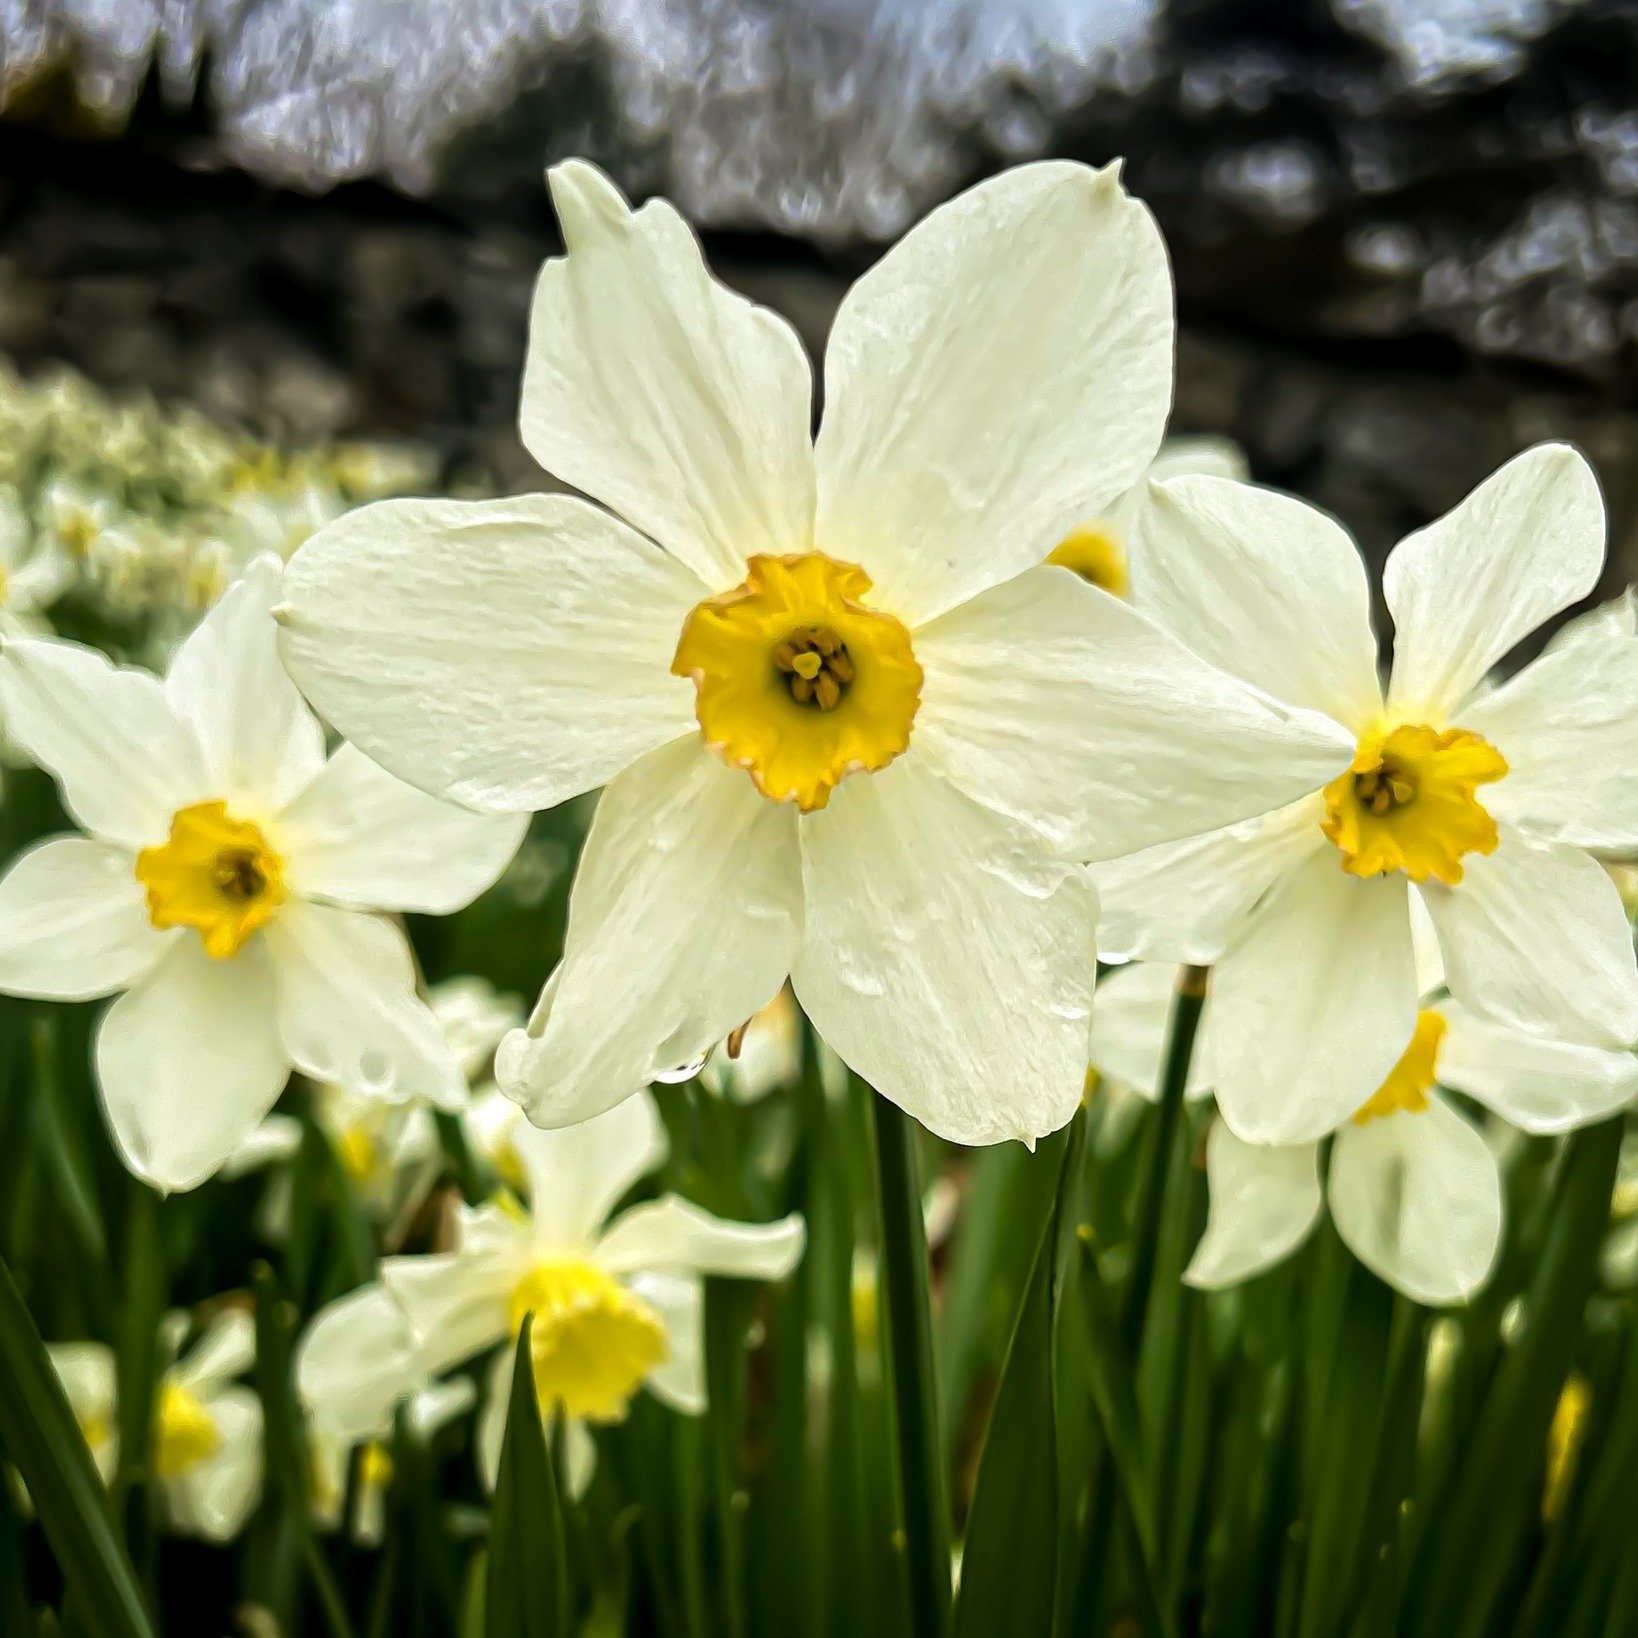 Our Early Spring Flower Weekend is almost here and the weather looks to be perfect for a stroll through Innisfree Garden! Open to the general public, this event will allow you to enjoy the thousands of daffodils and other spring flowers that call Inn